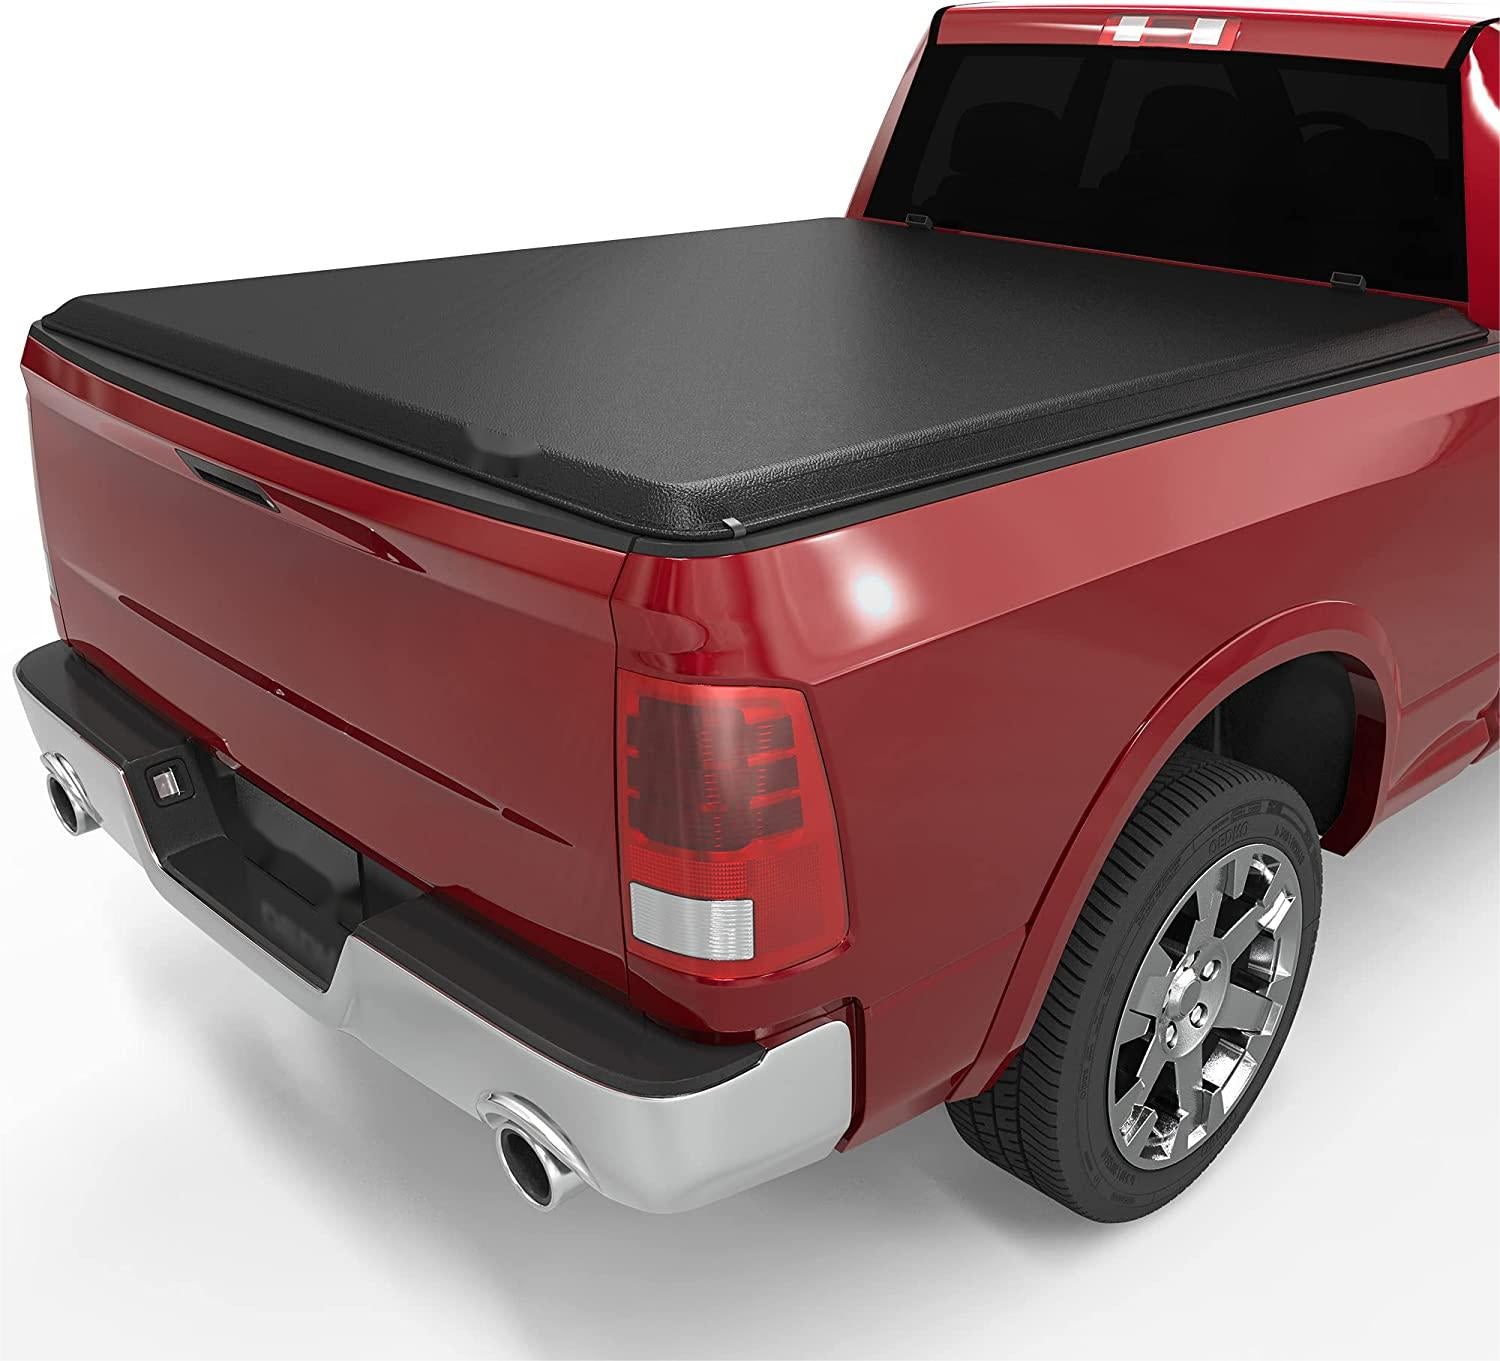 GARVEE Roll-Up Soft Vinyl Truck Bed 5.5 FT Tonneau Cover Compatible for 2004-2023 Ford F150